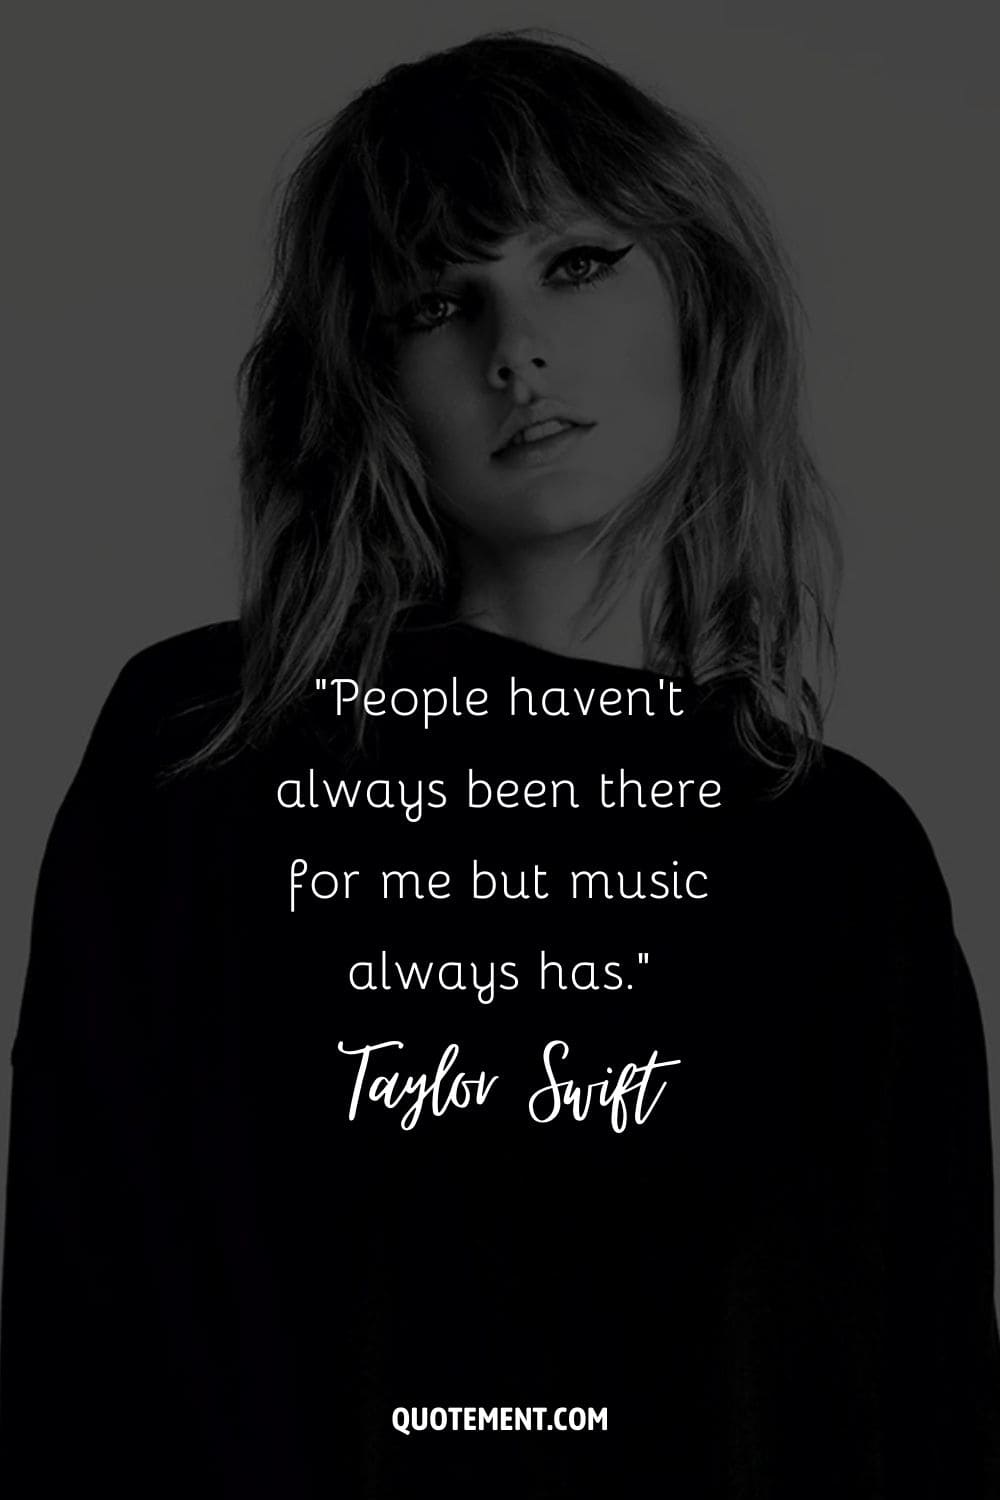 “People haven't always been there for me but music always has.” ― Taylor Swift